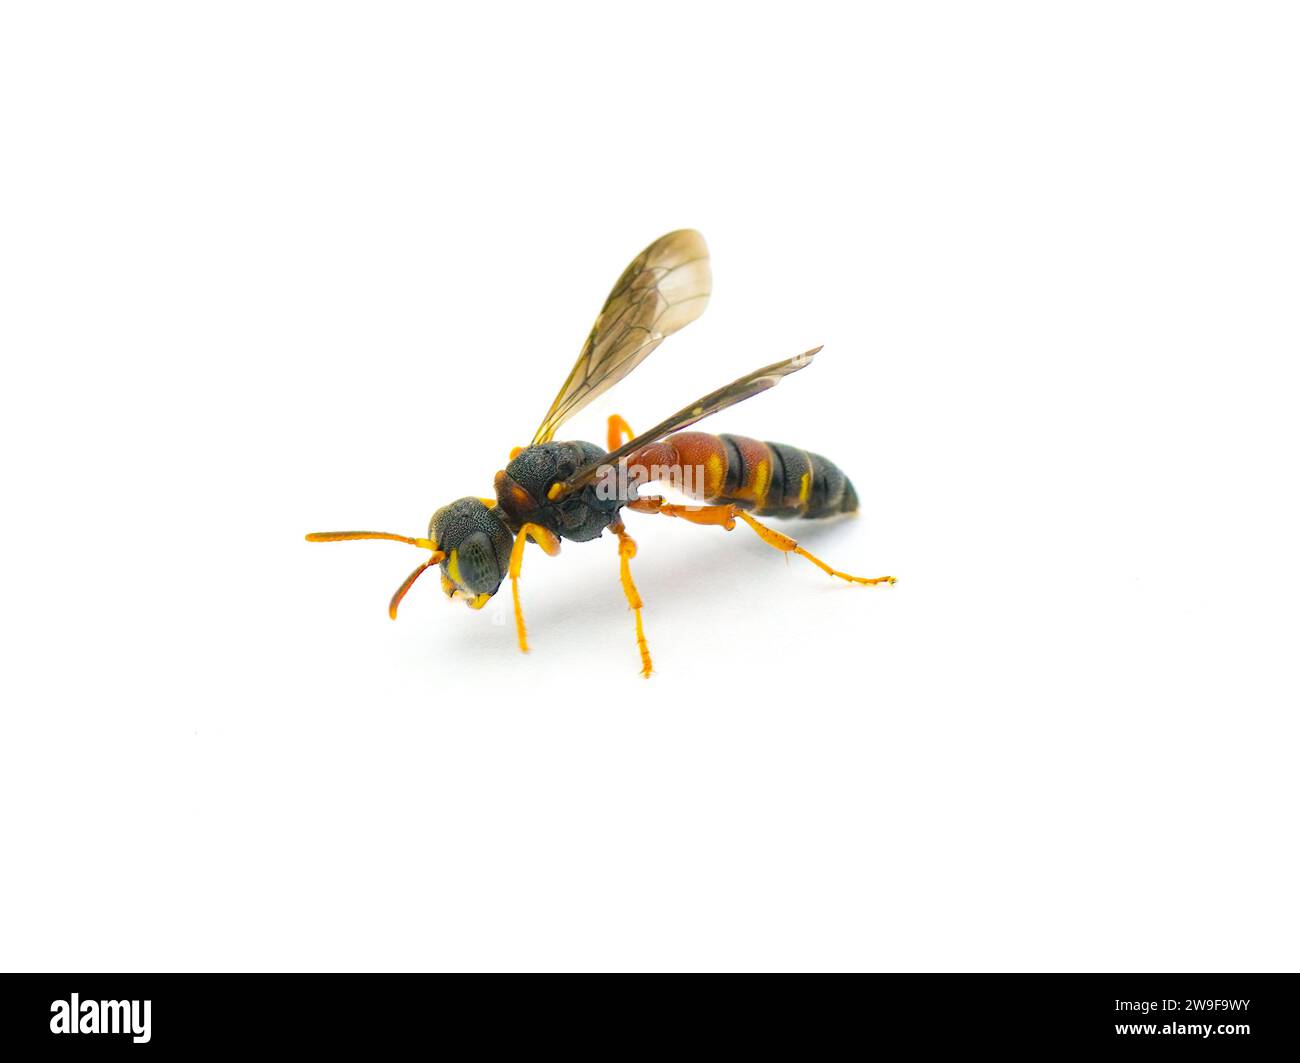 Cerceris bicornuta is a species of wasp in the family Crabronidae. It is found in Central America and North America, isolated on white background side Stock Photo